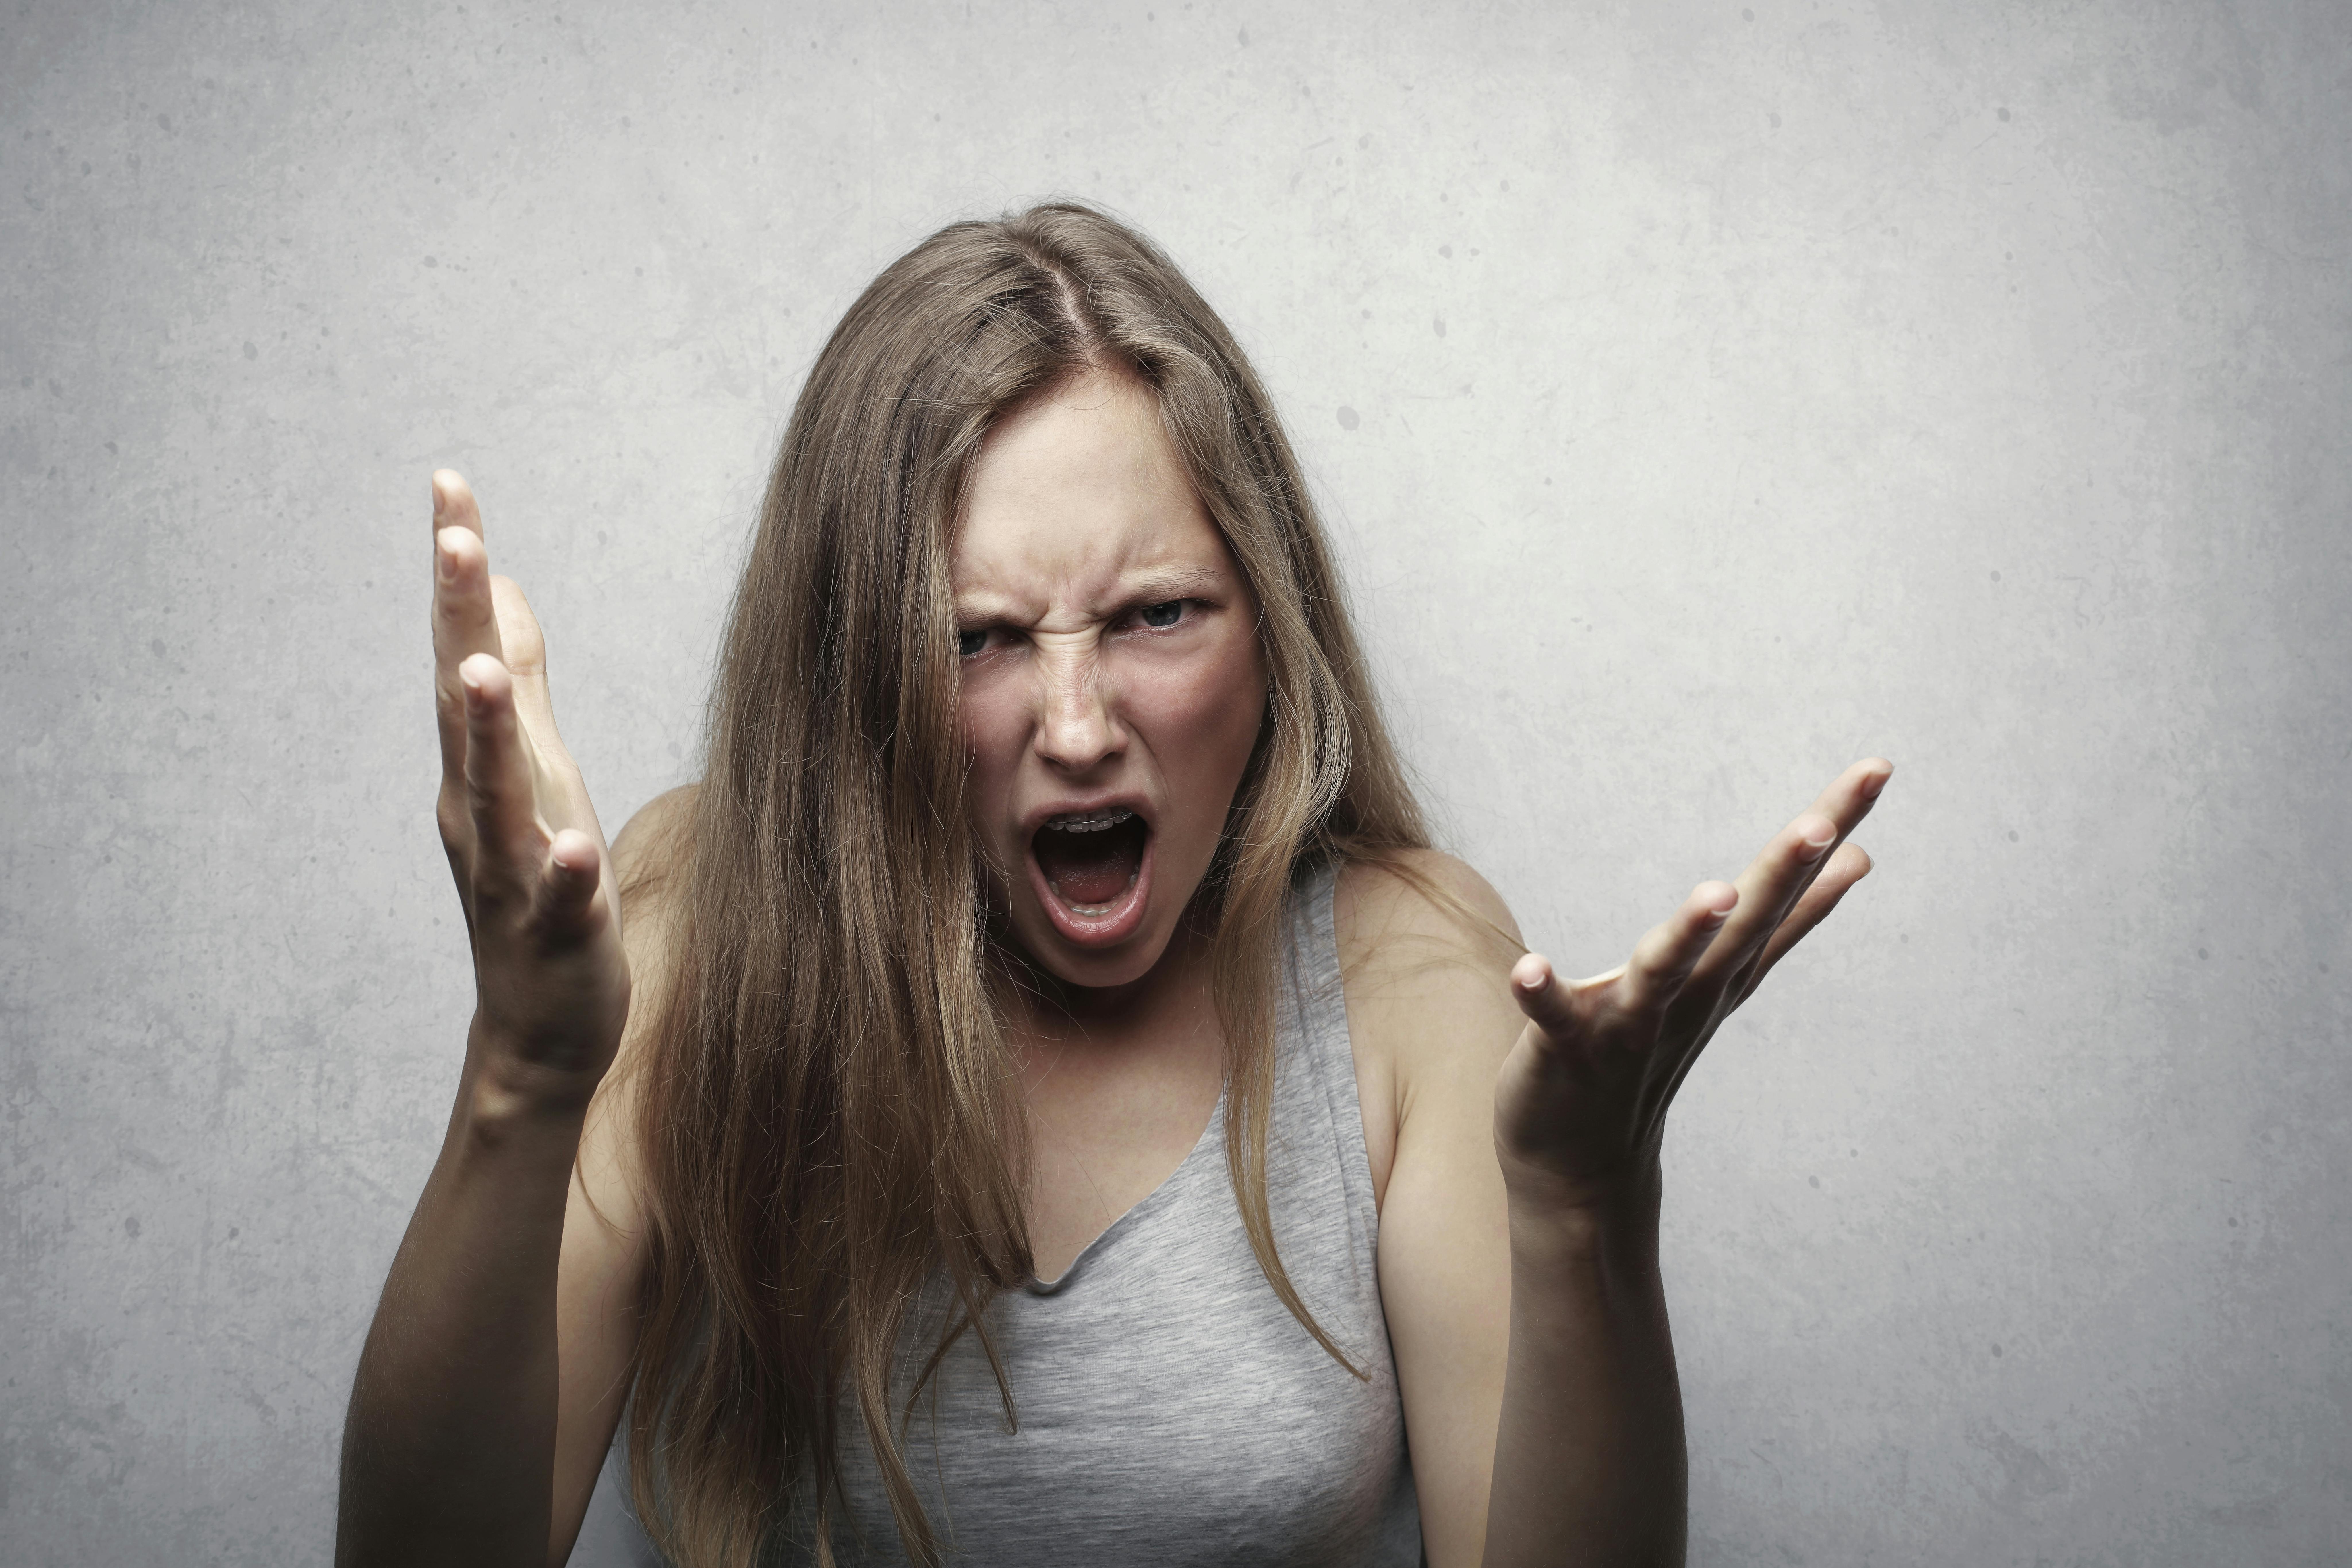 A woman expressing rage | Source: Pexels